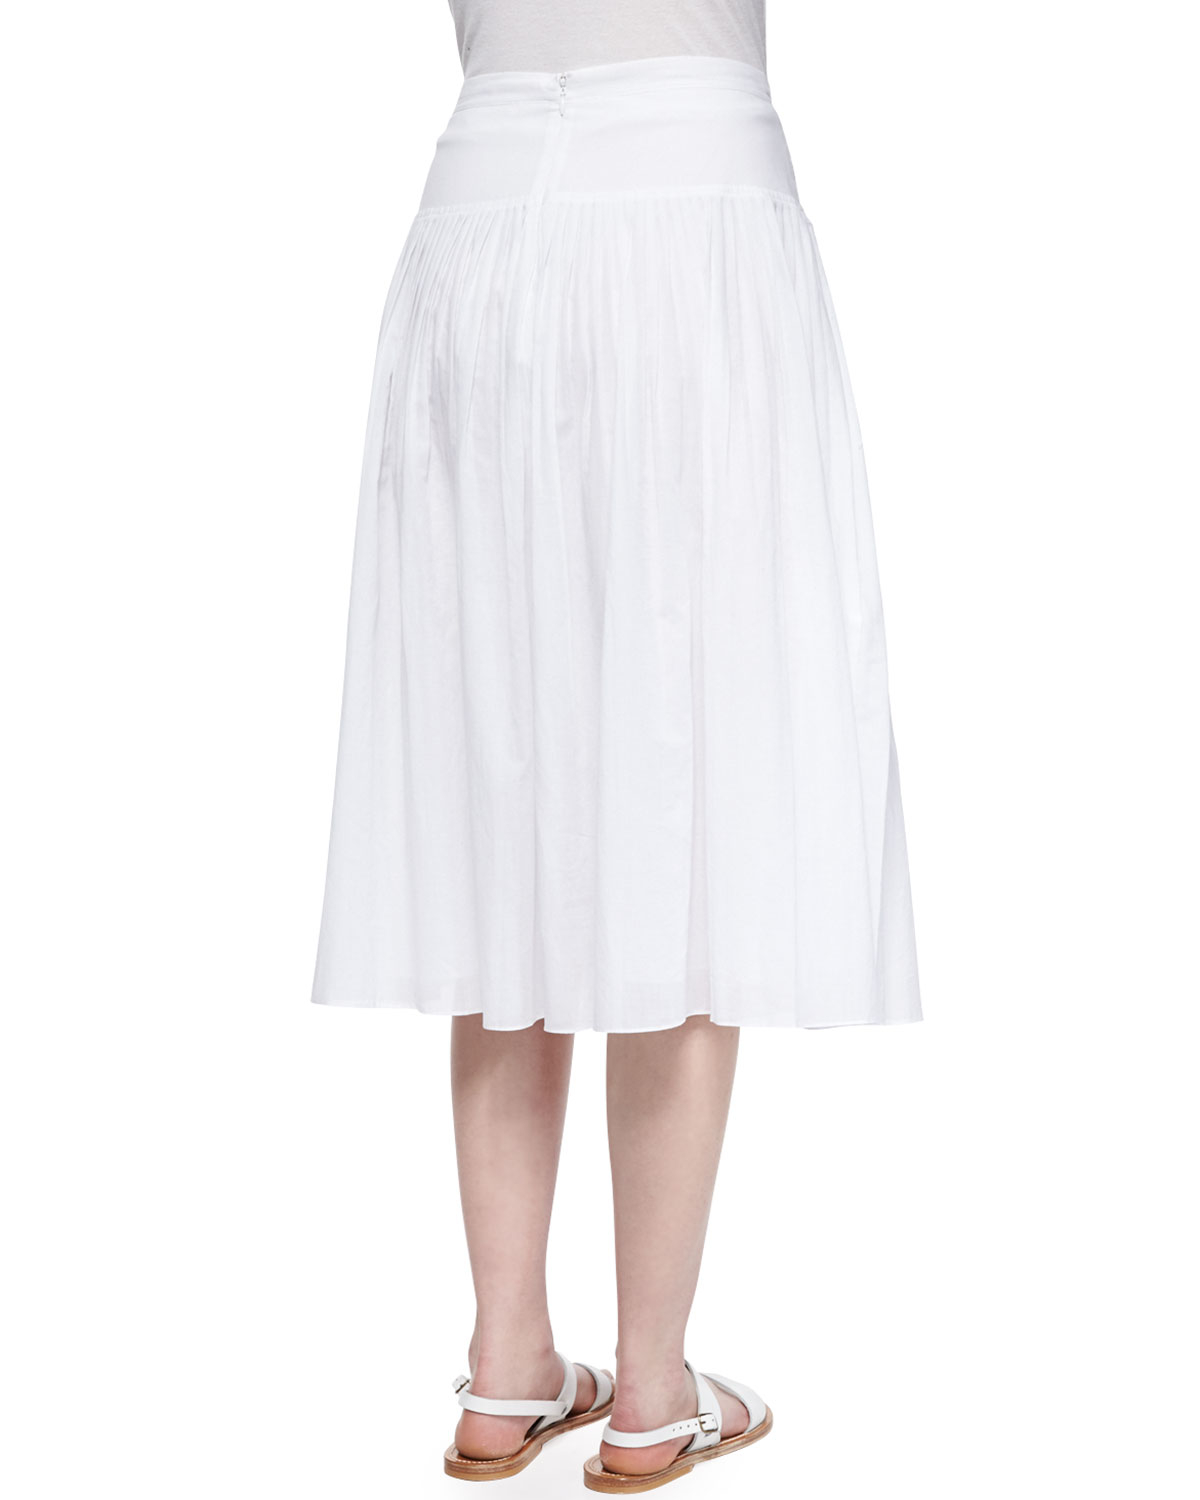 Lyst - Rebecca Taylor Pleated Cotton Voile Skirt in Blue